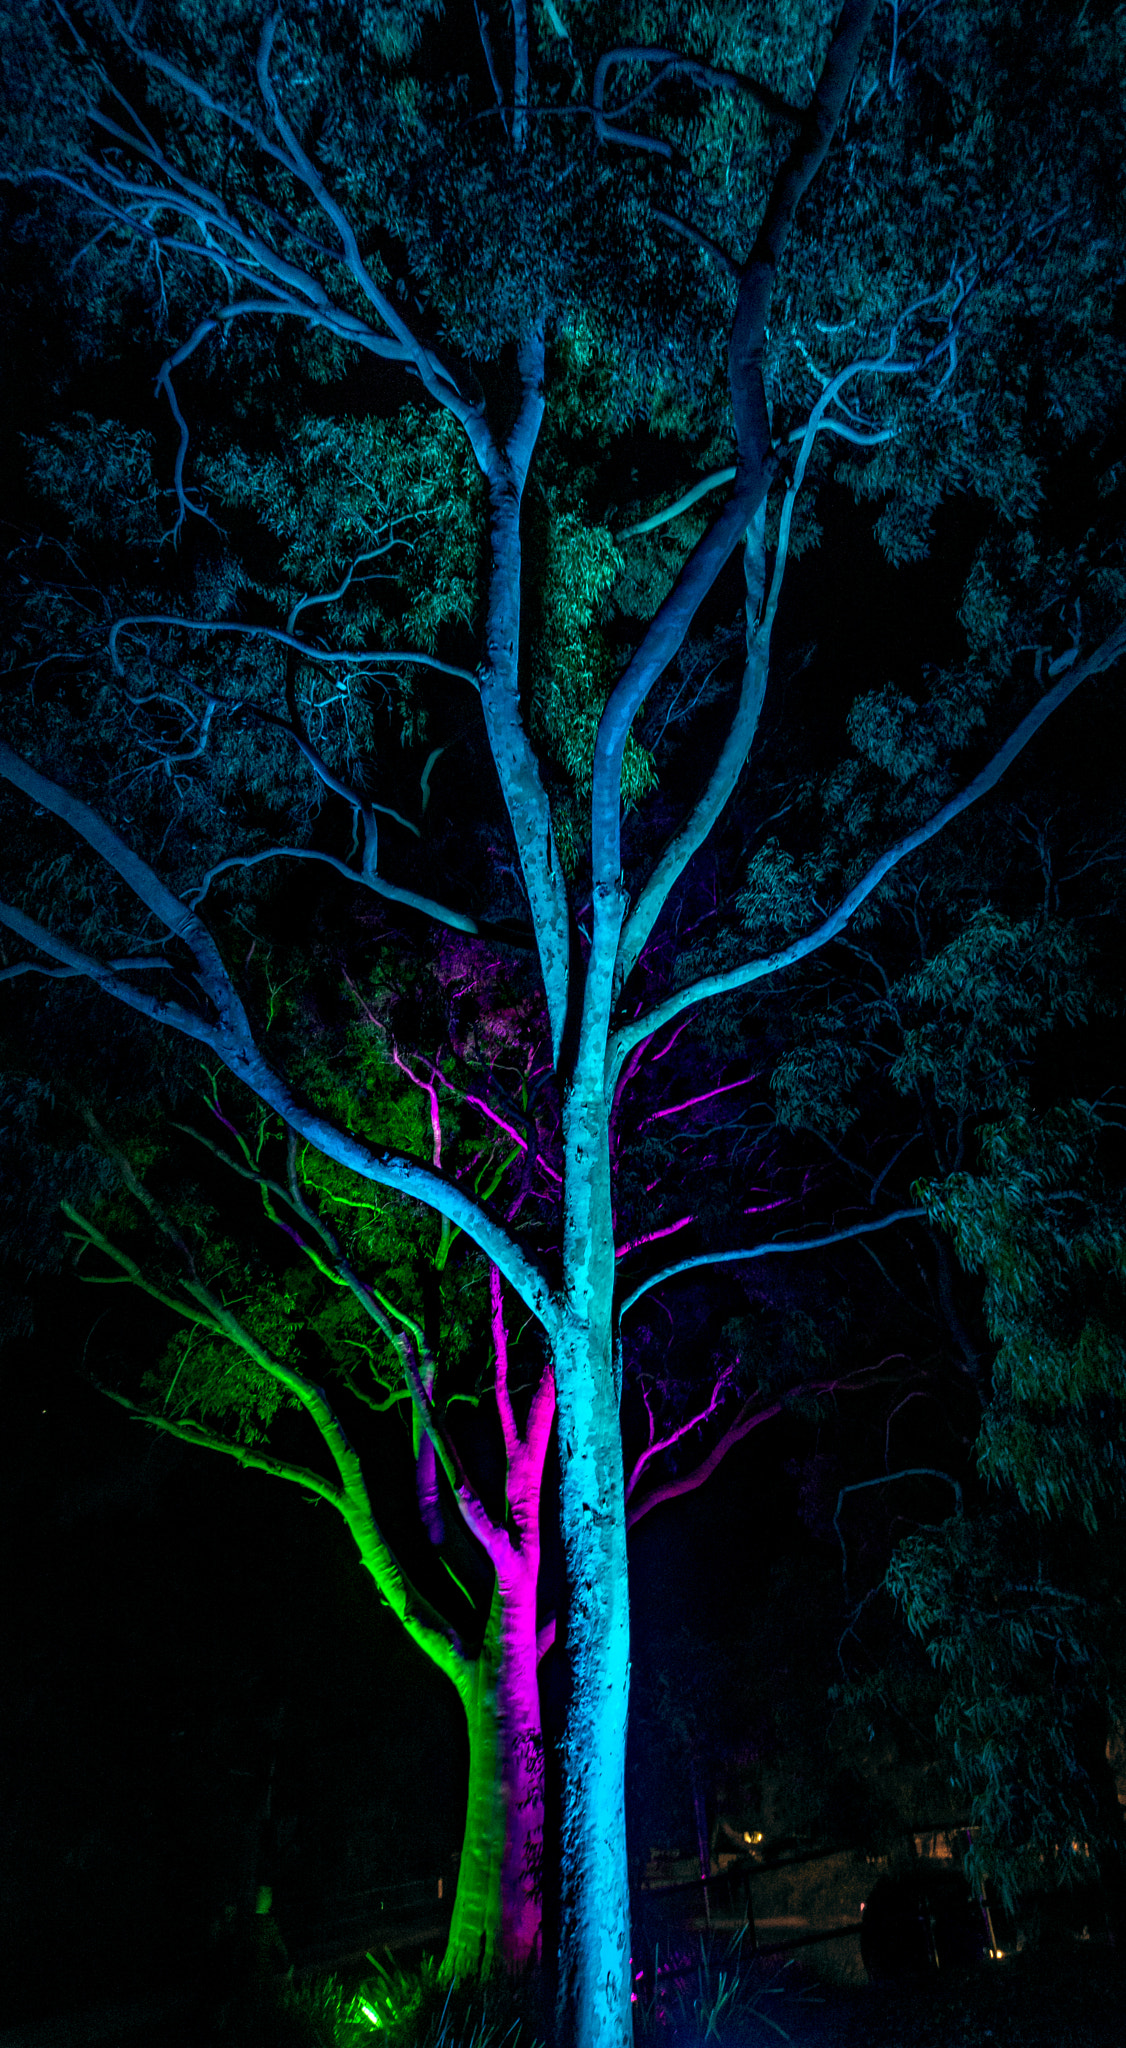 Nikon D7200 sample photo. Gum trees painted with light photography